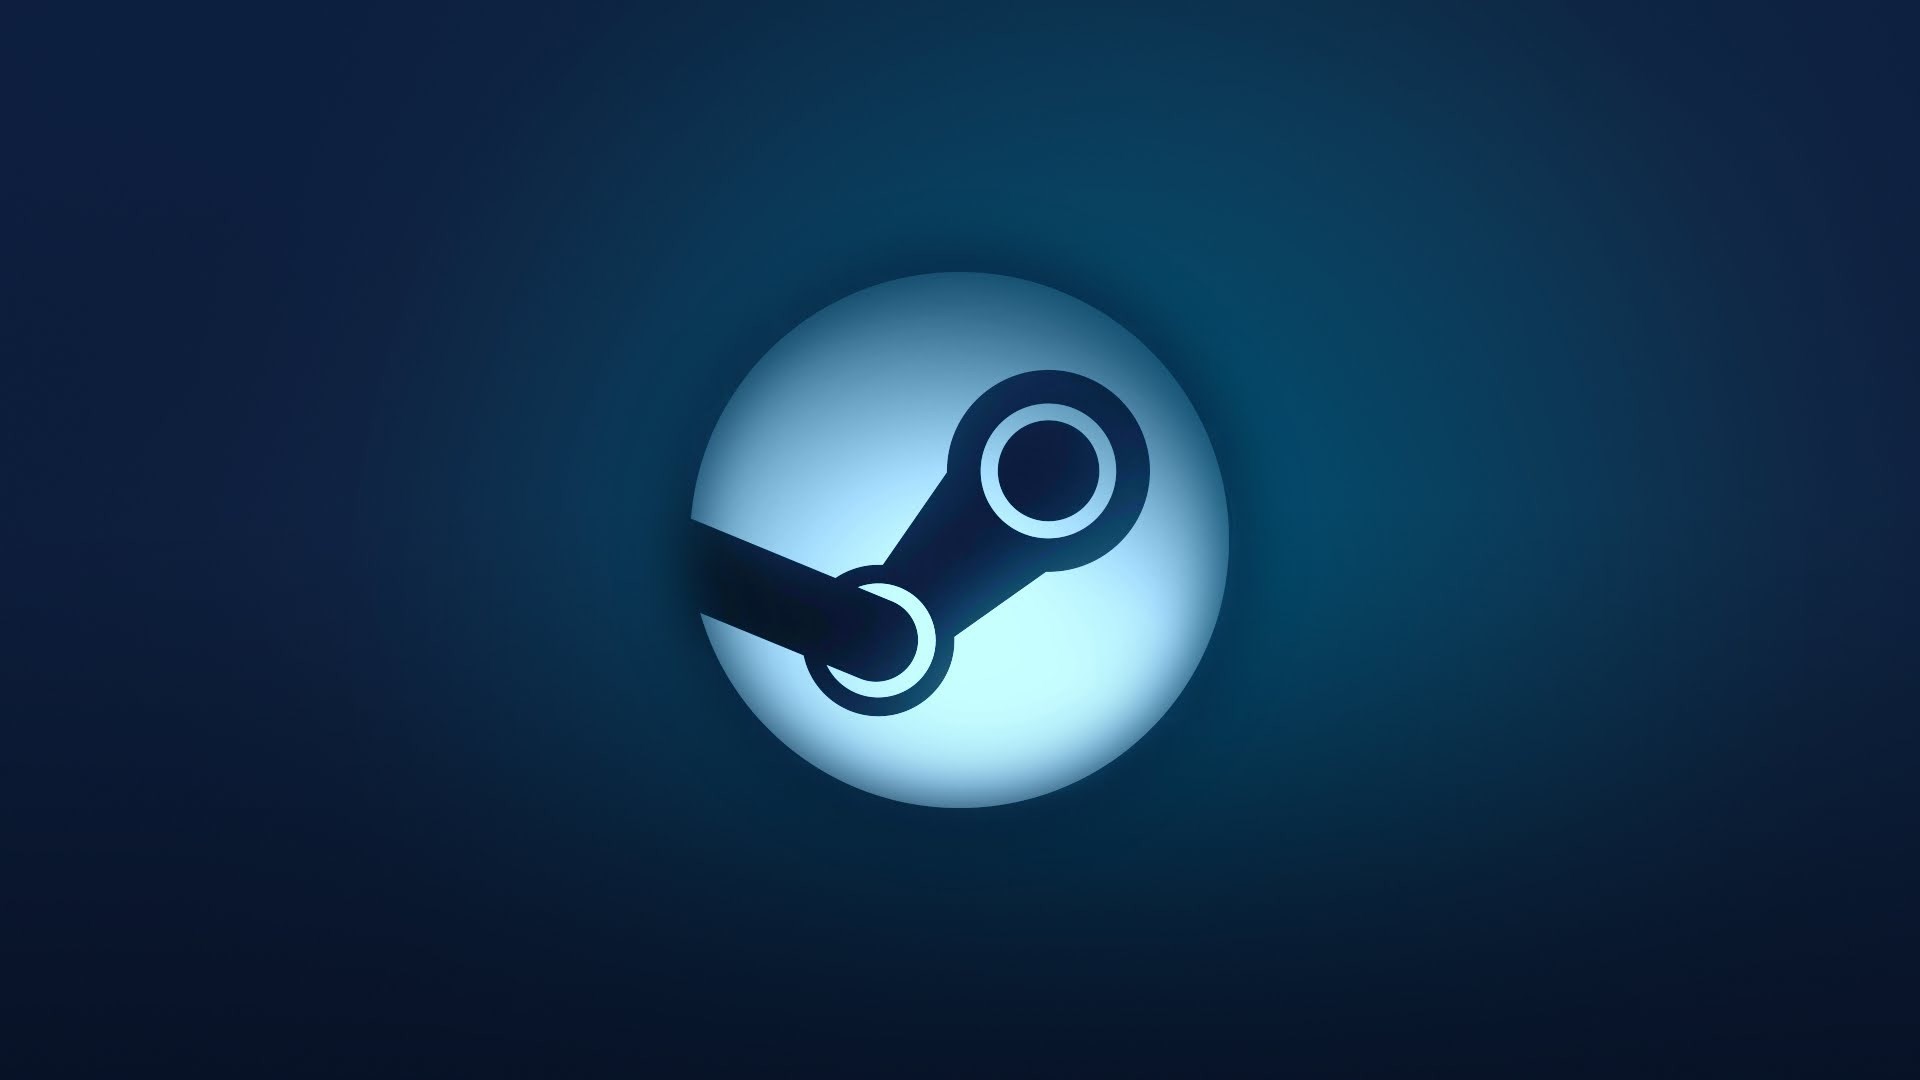 how to download a wallpaper from steam workshop